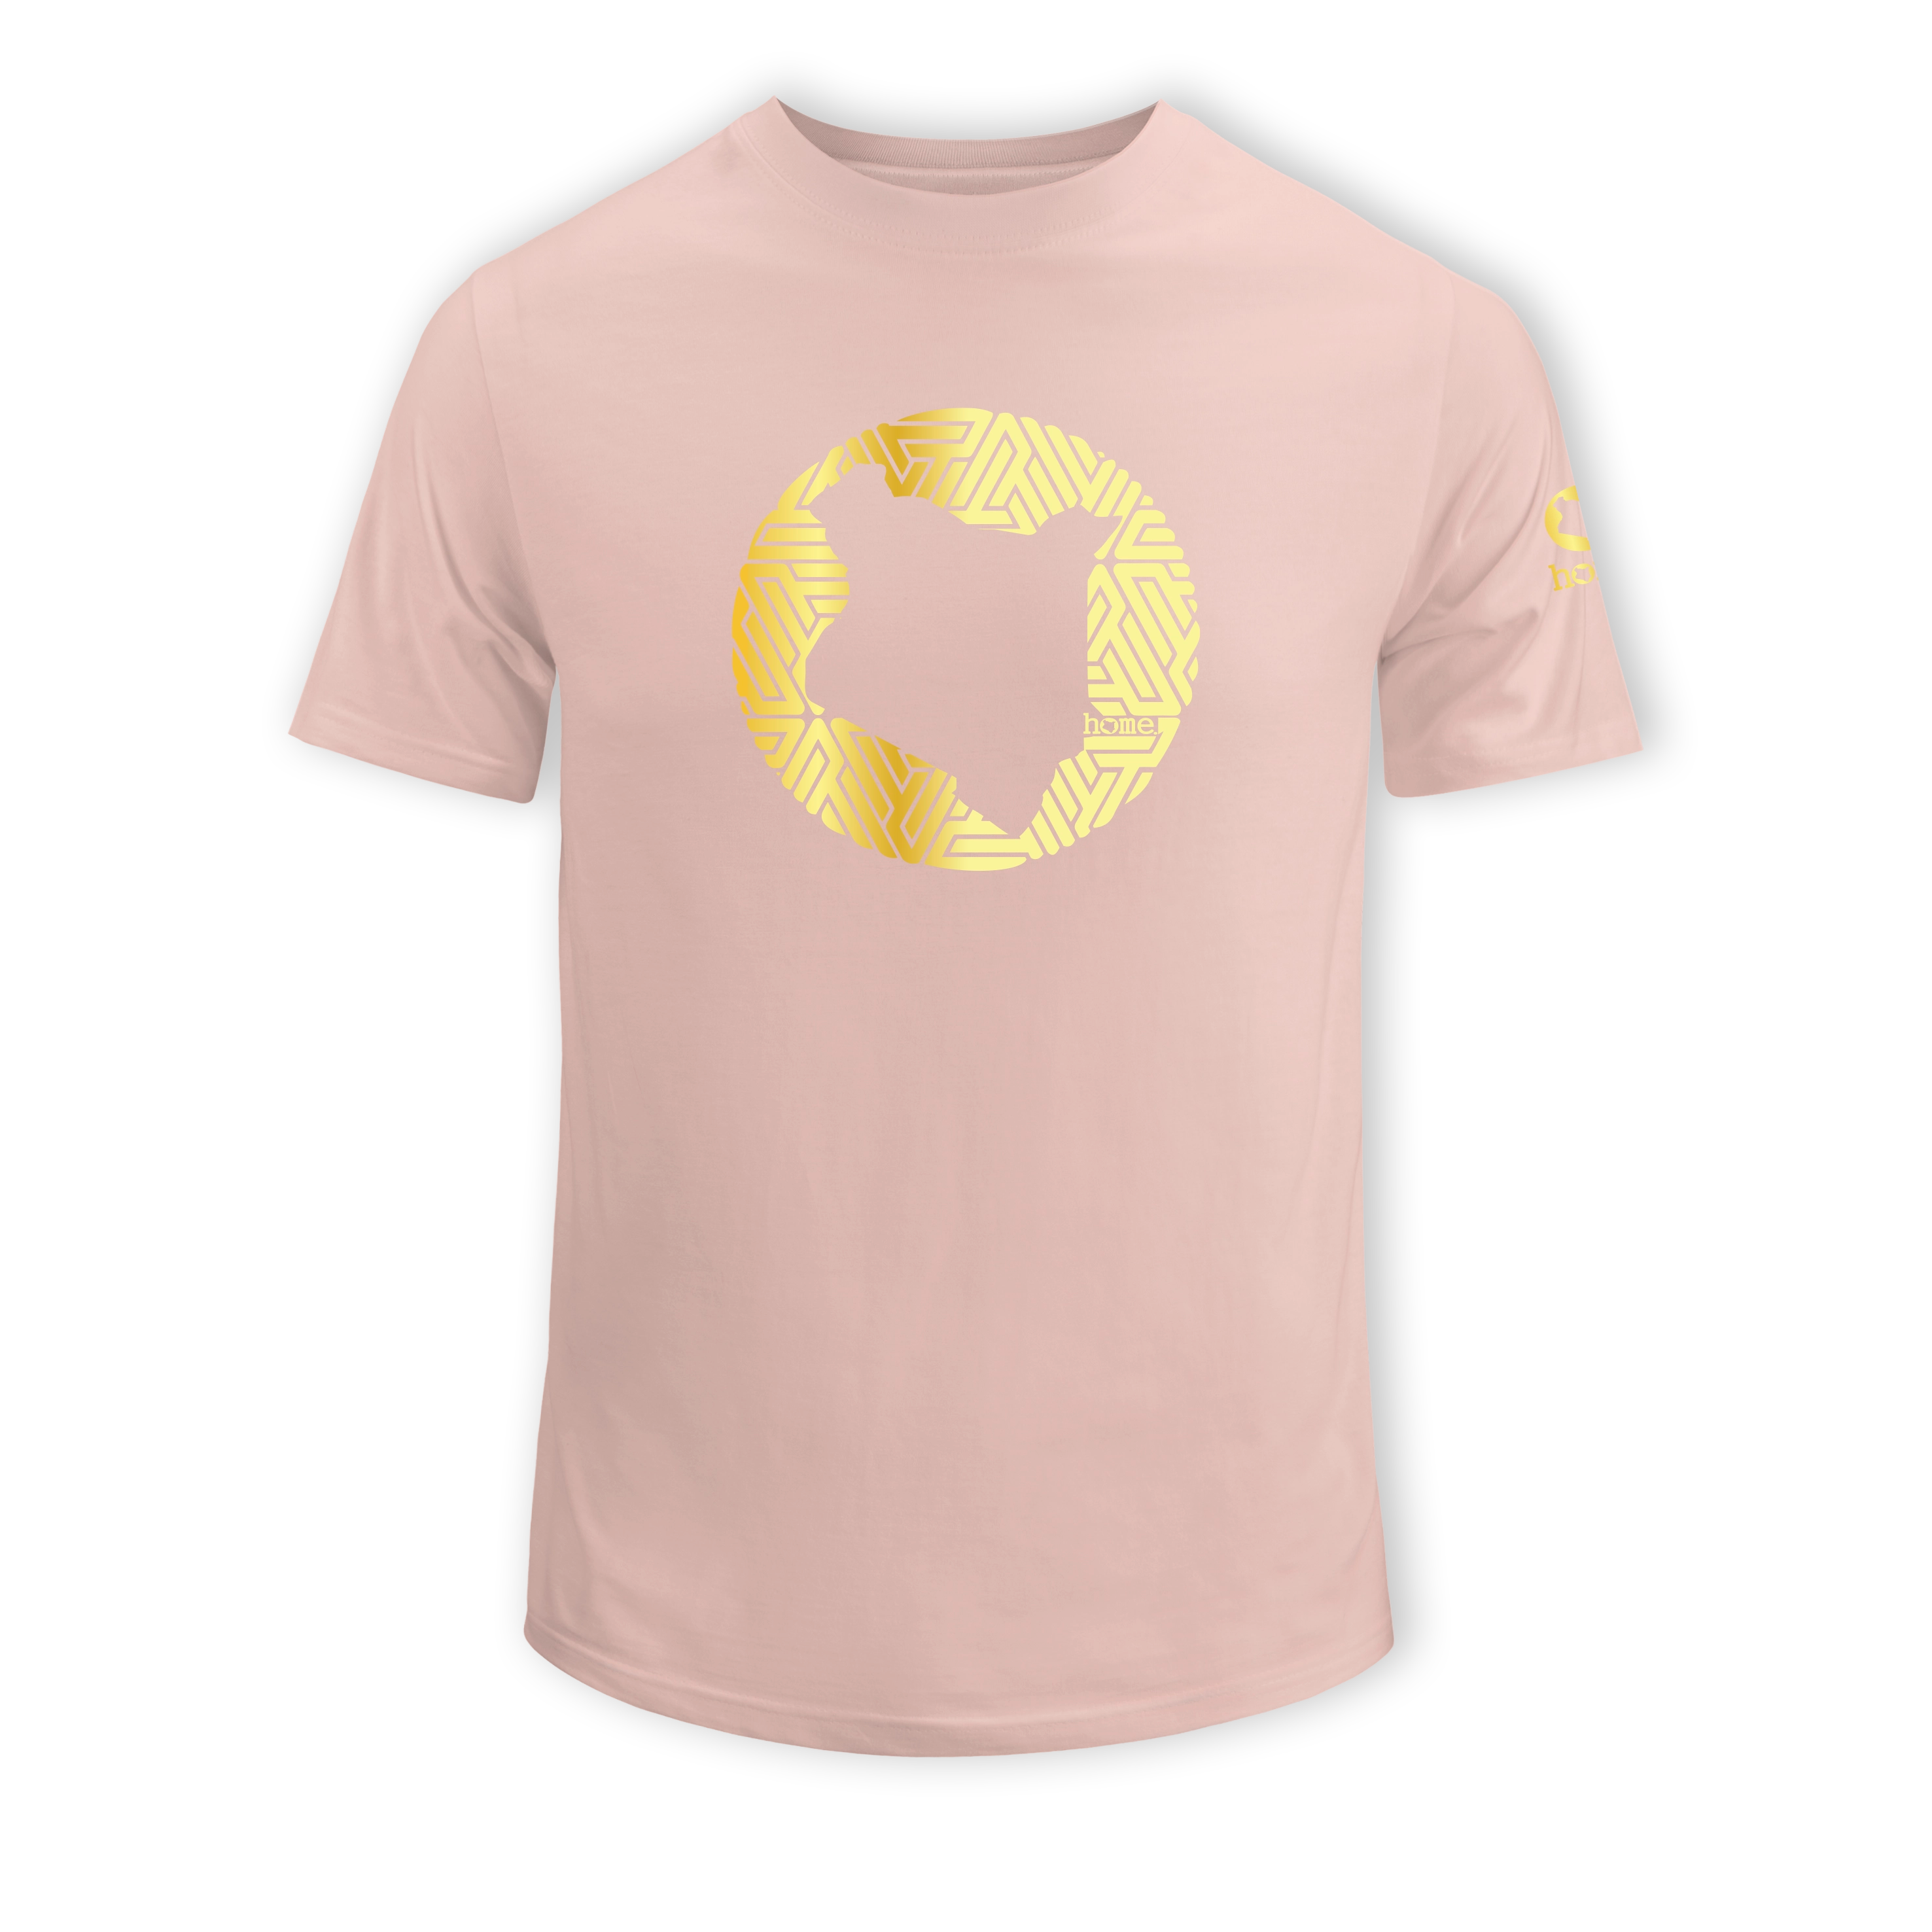 home_254 KIDS SHORT-SLEEVED PEACH T-SHIRT WITH A GOLD MAP PRINT – COTTON PLUS FABRIC